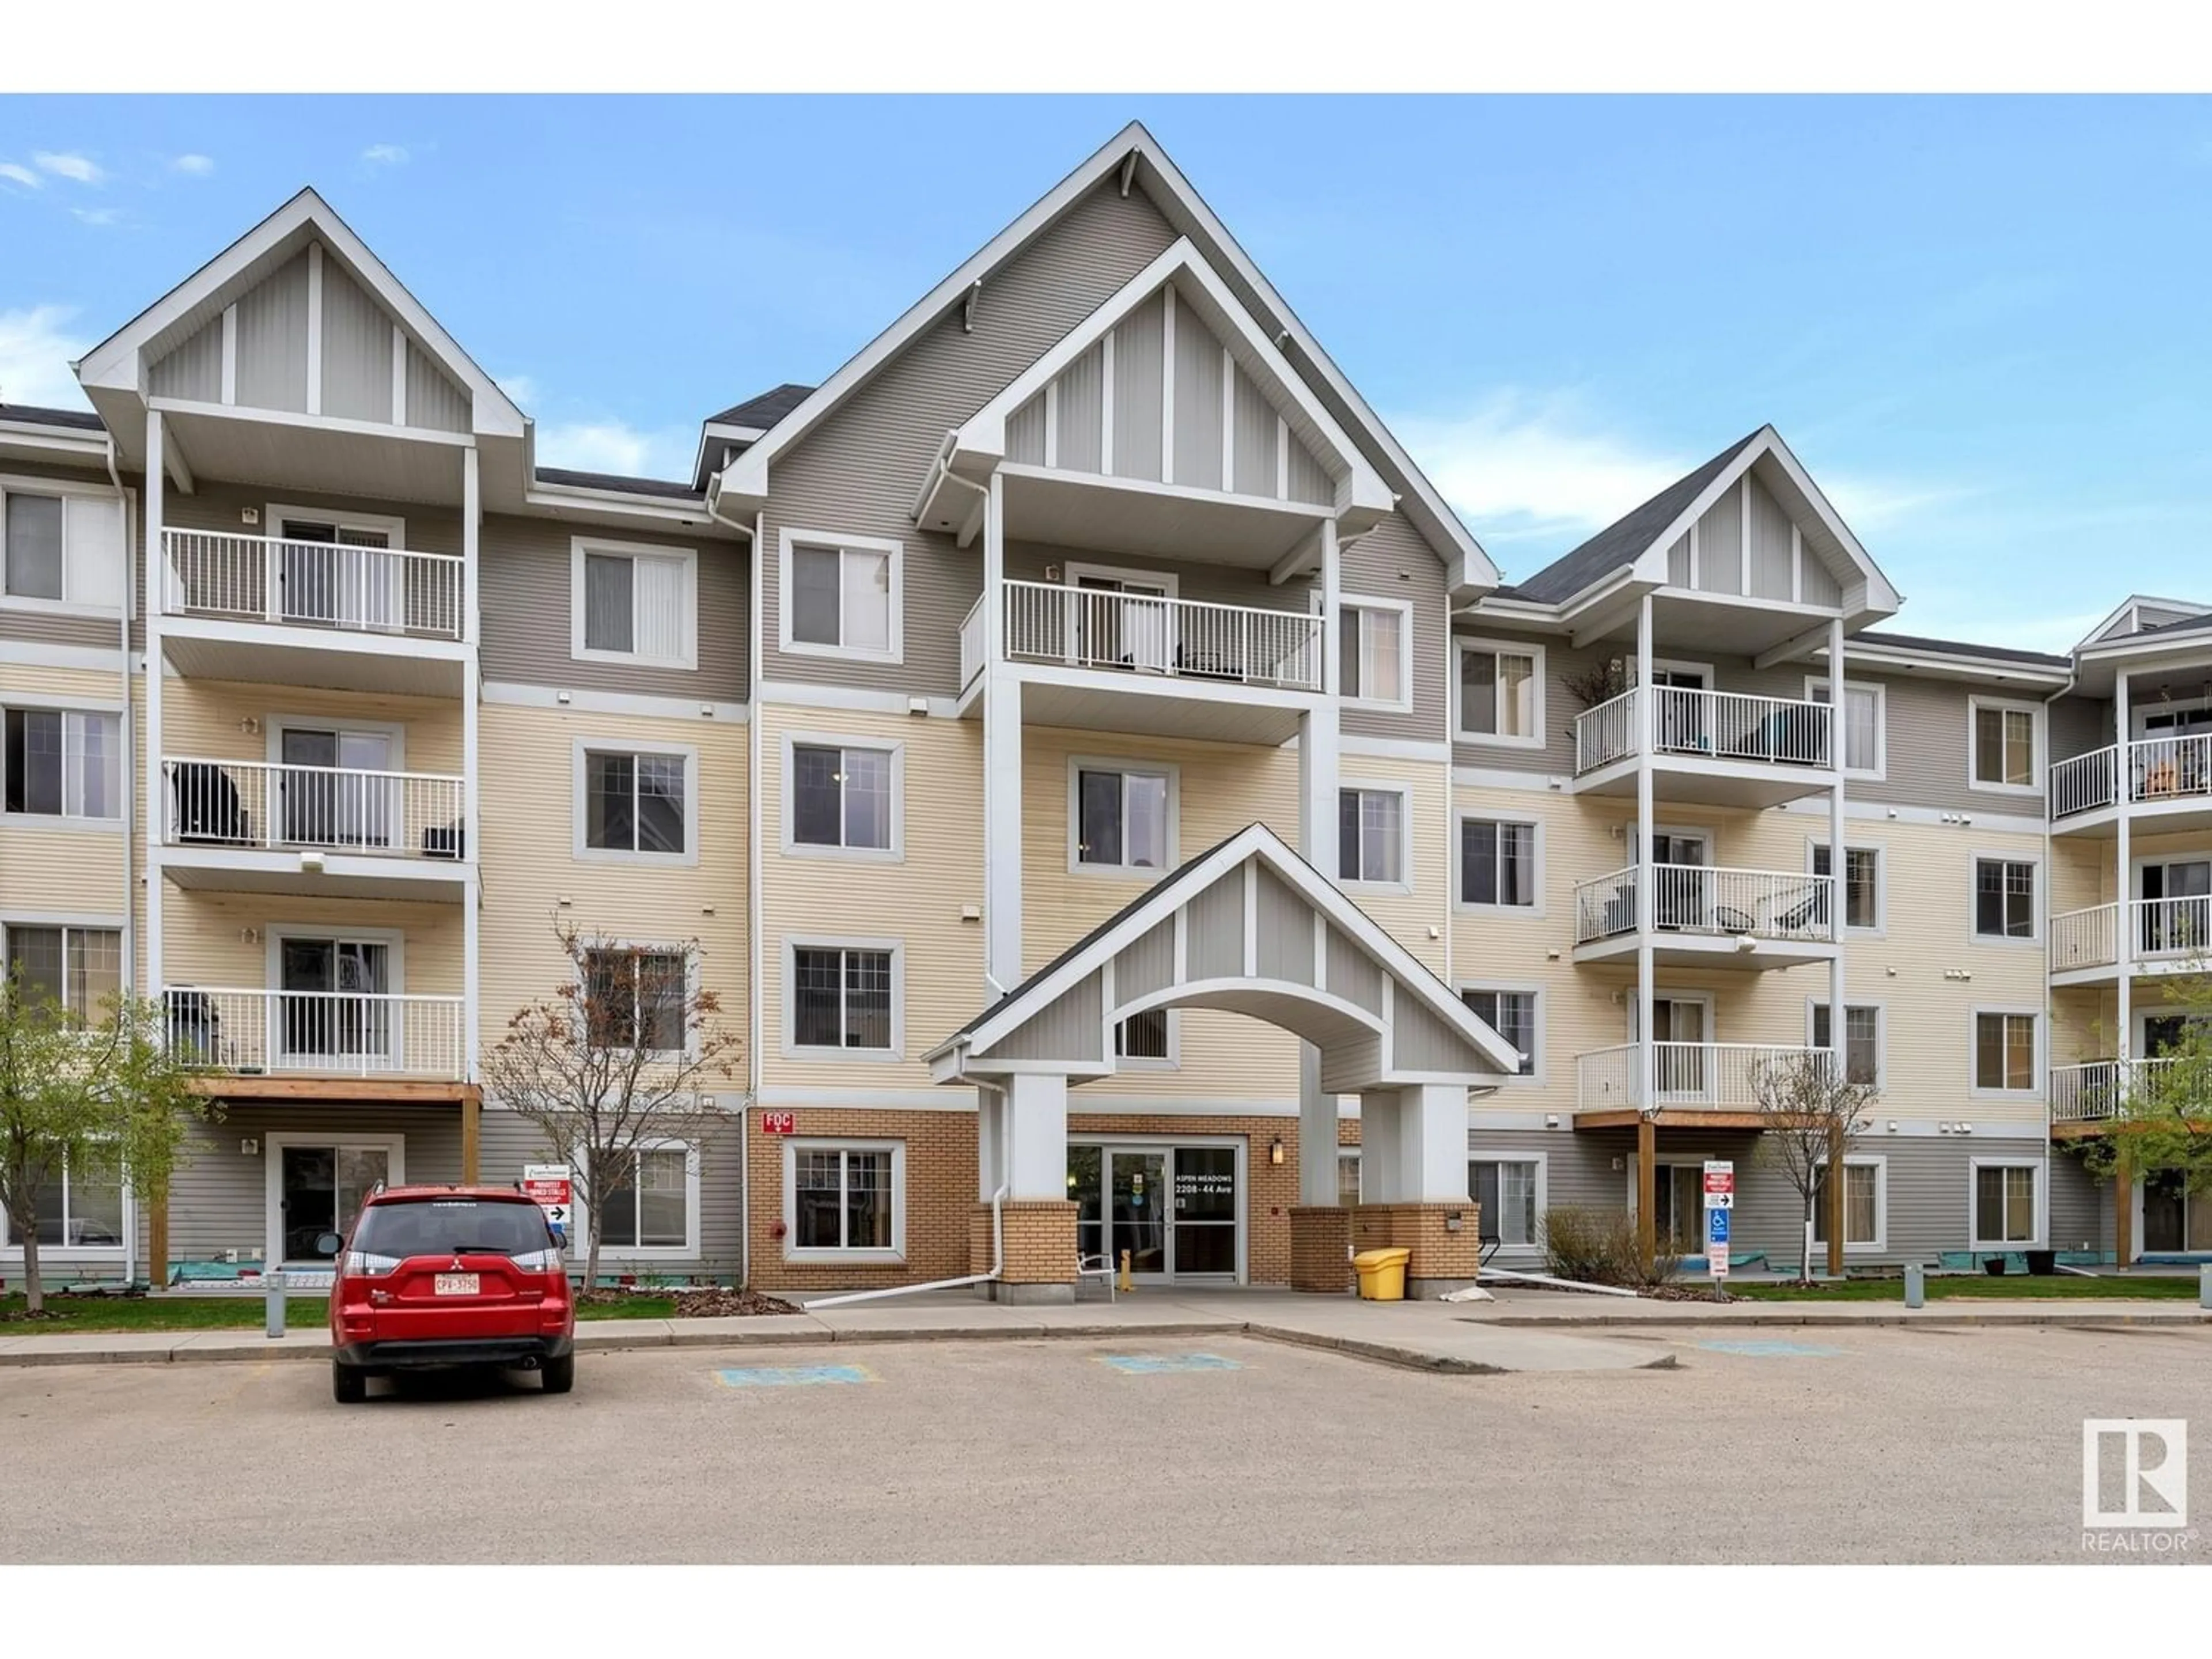 A pic from exterior of the house or condo for #302 2208 44 AV NW, Edmonton Alberta T6T0G6